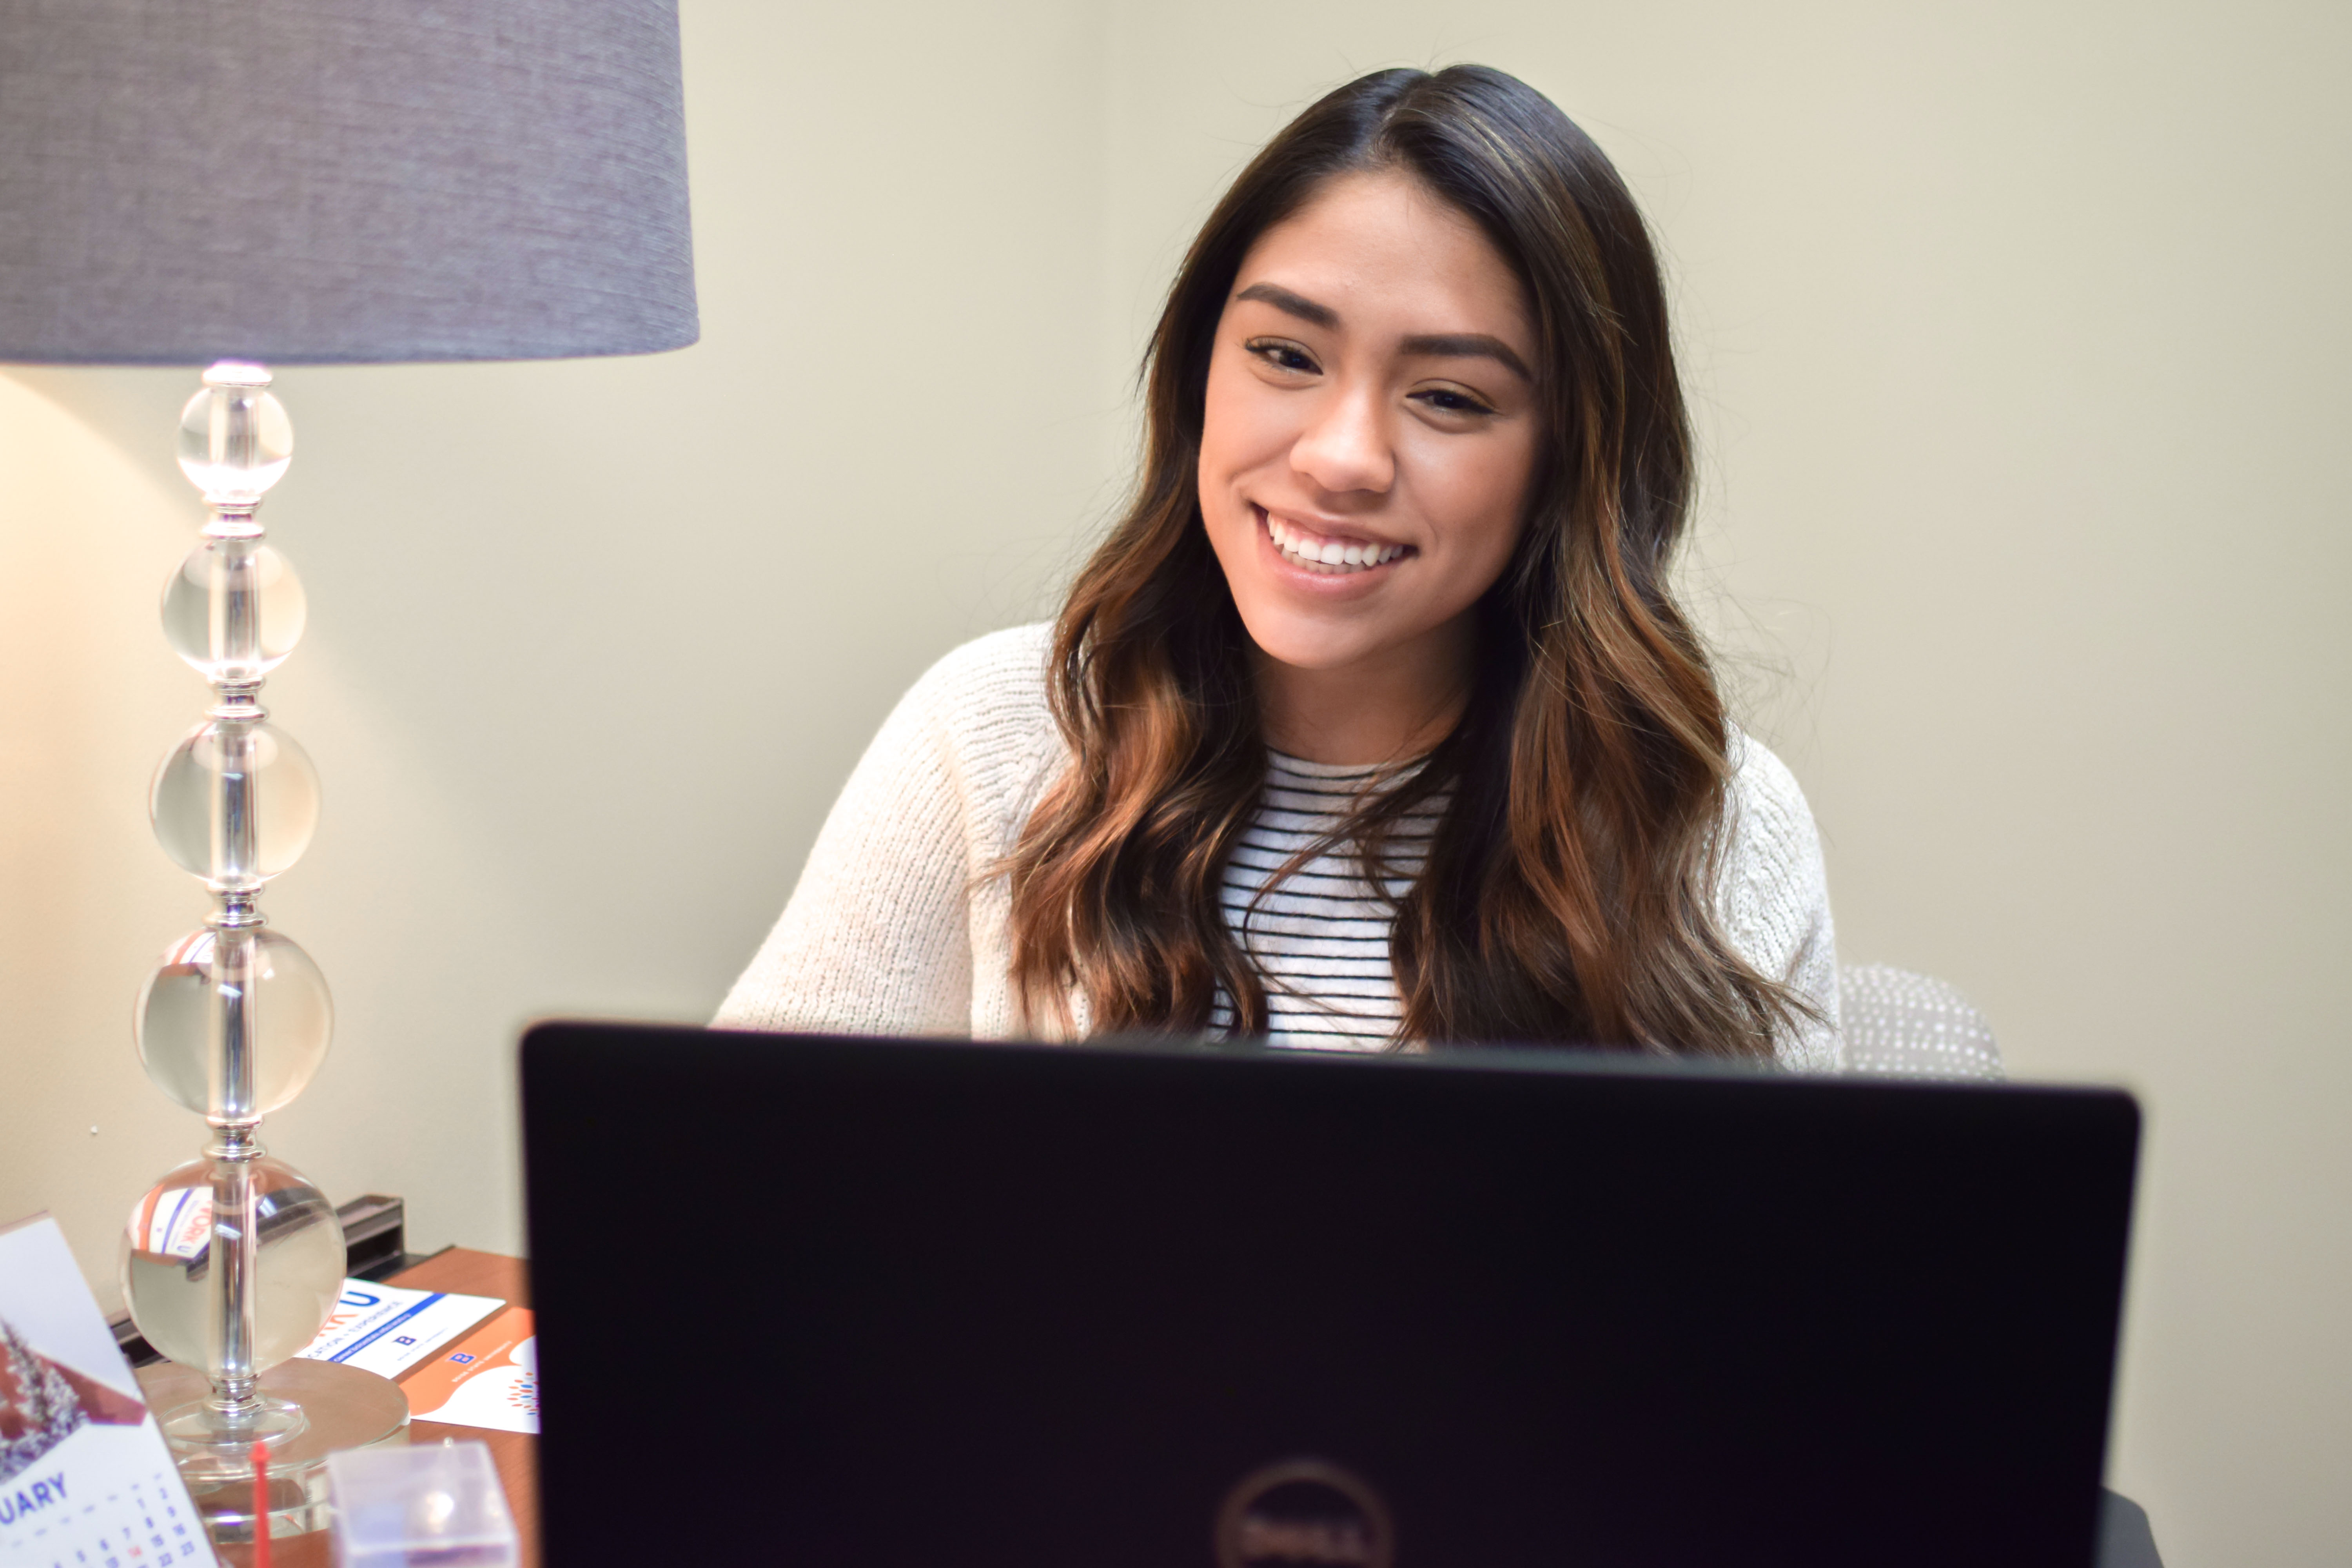 Student looking at laptop and smiling, participating in an online video appointment with a career counselor